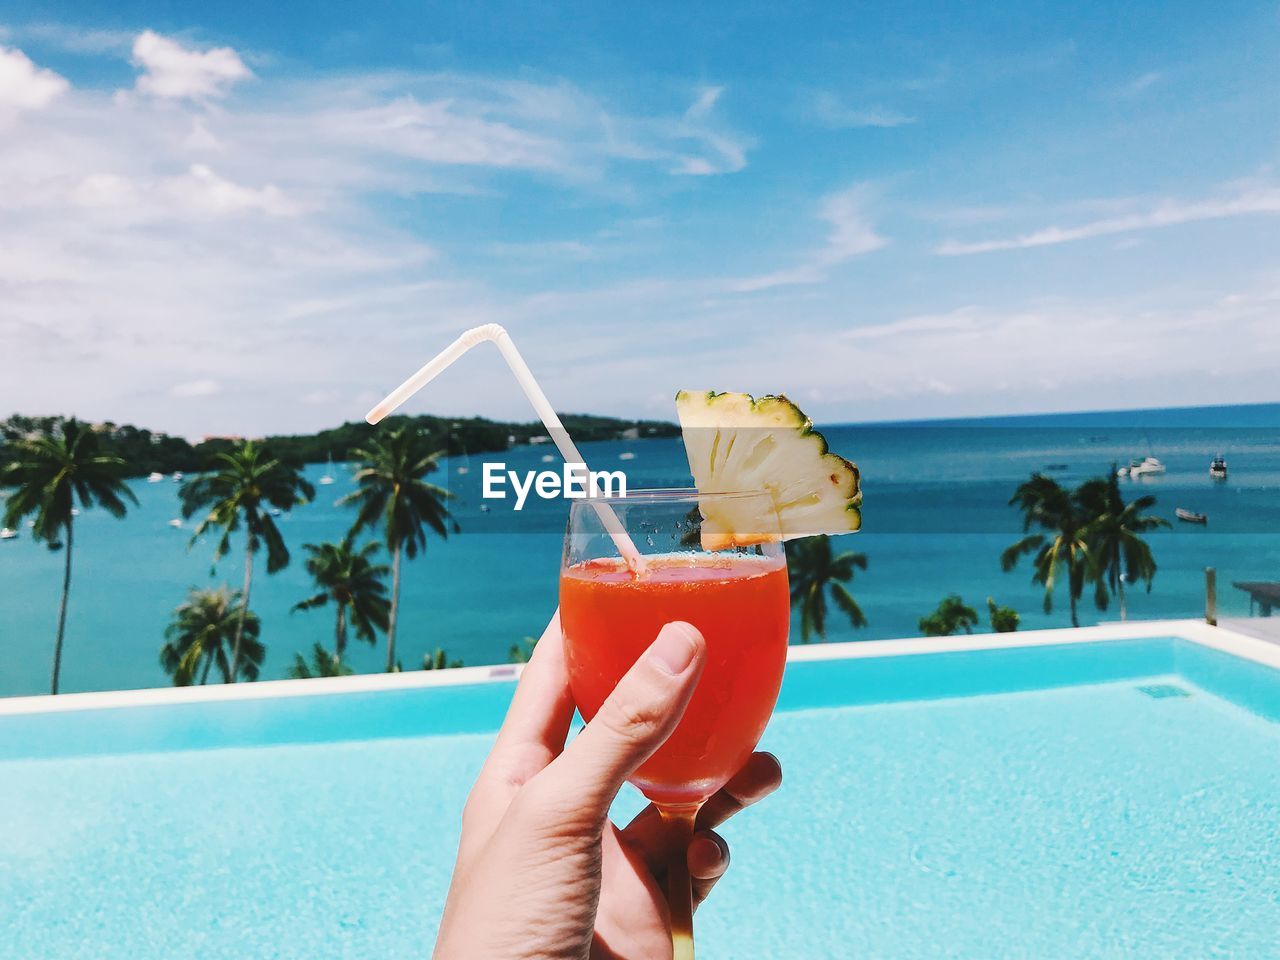 Cropped hand holding drink by infinity pool with sea in background